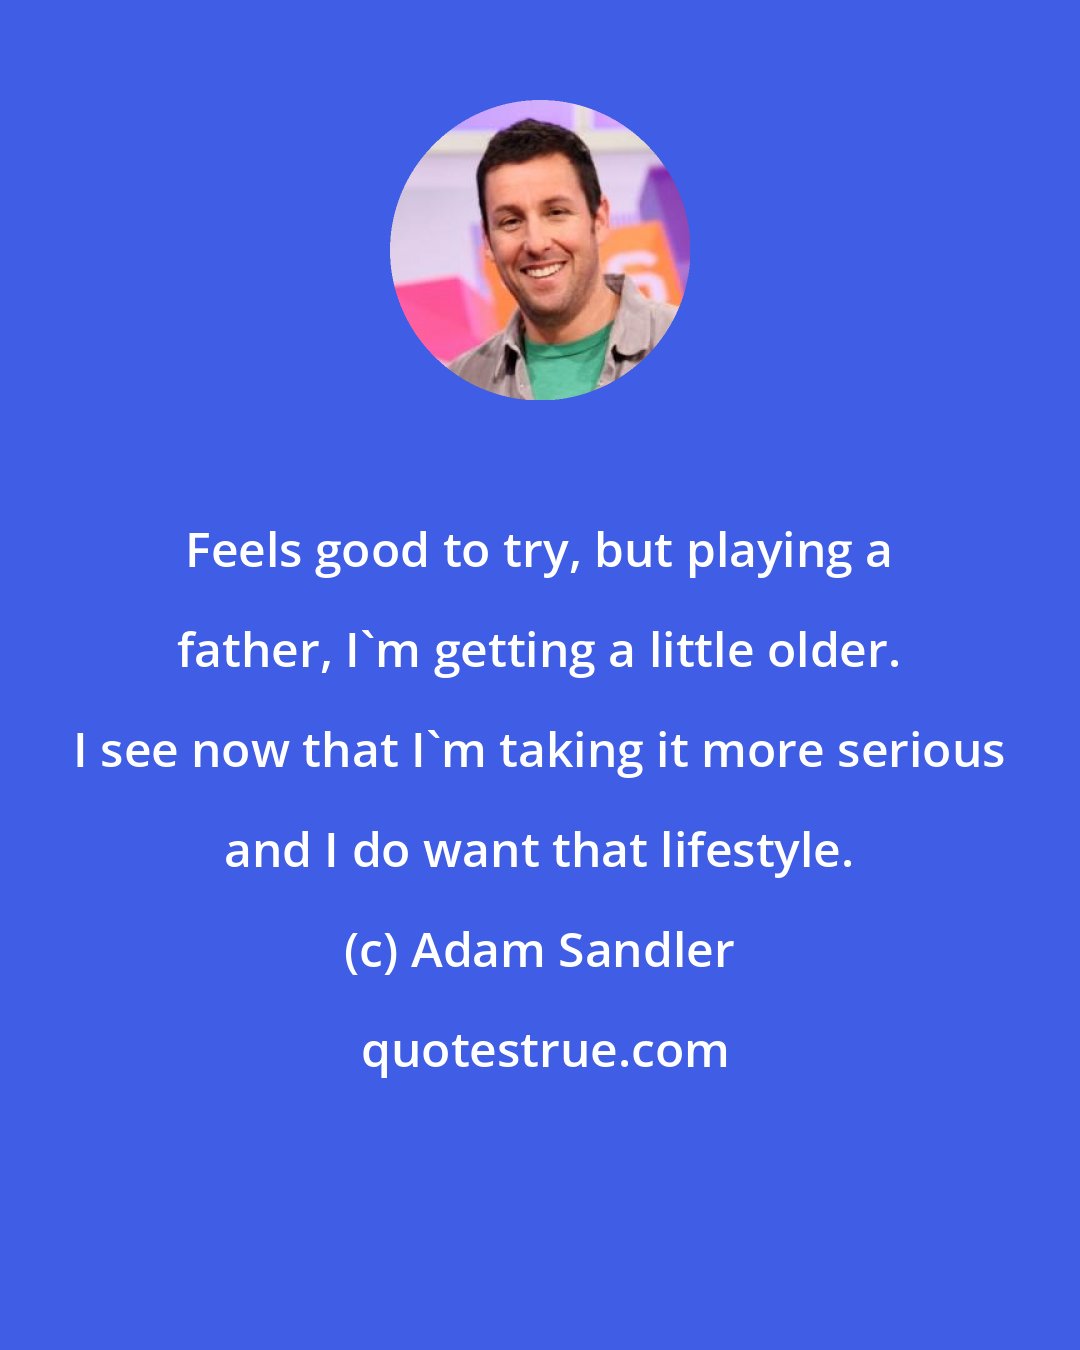 Adam Sandler: Feels good to try, but playing a father, I'm getting a little older. I see now that I'm taking it more serious and I do want that lifestyle.